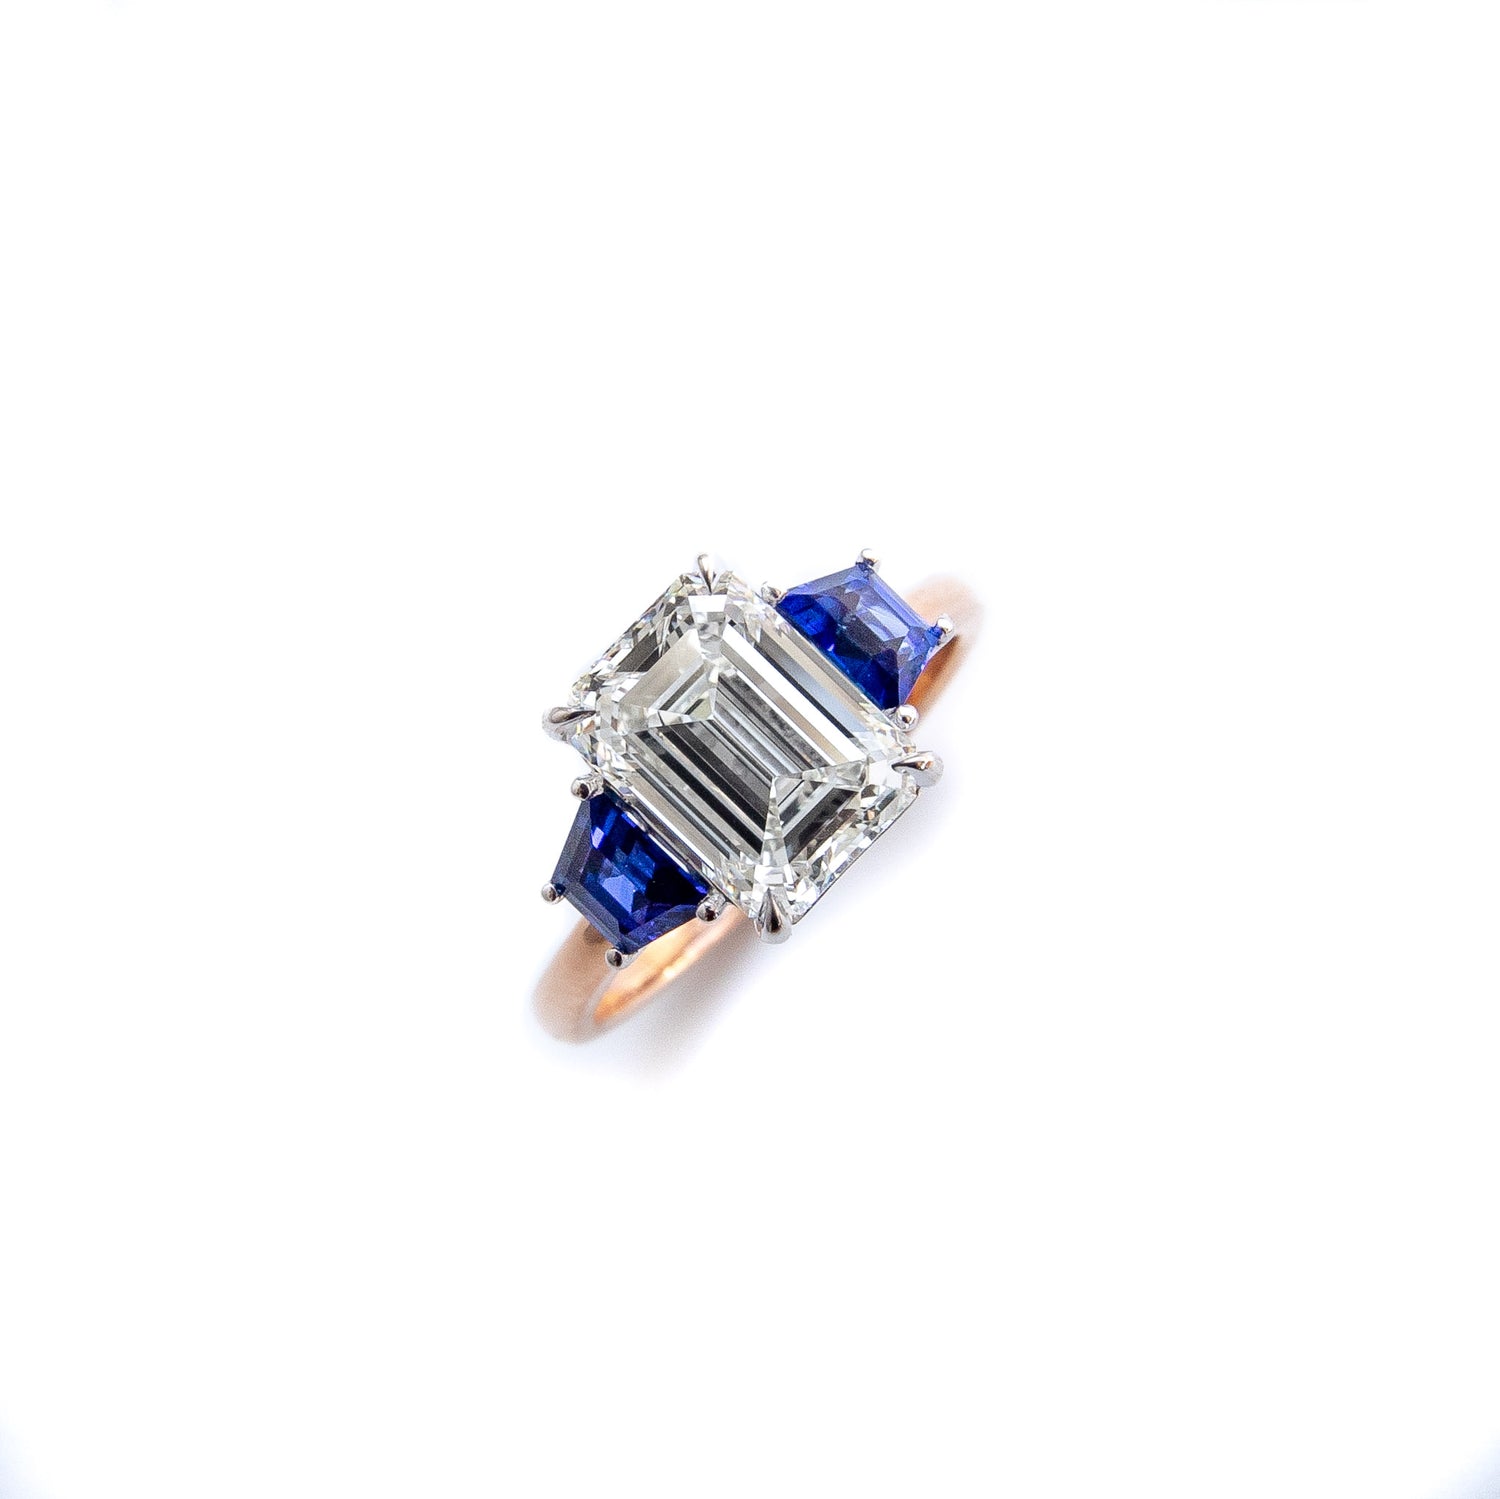 Bespoke Diamond and Sapphire Engagement Ring Hong Kong by Valentina Fine Jewellery 